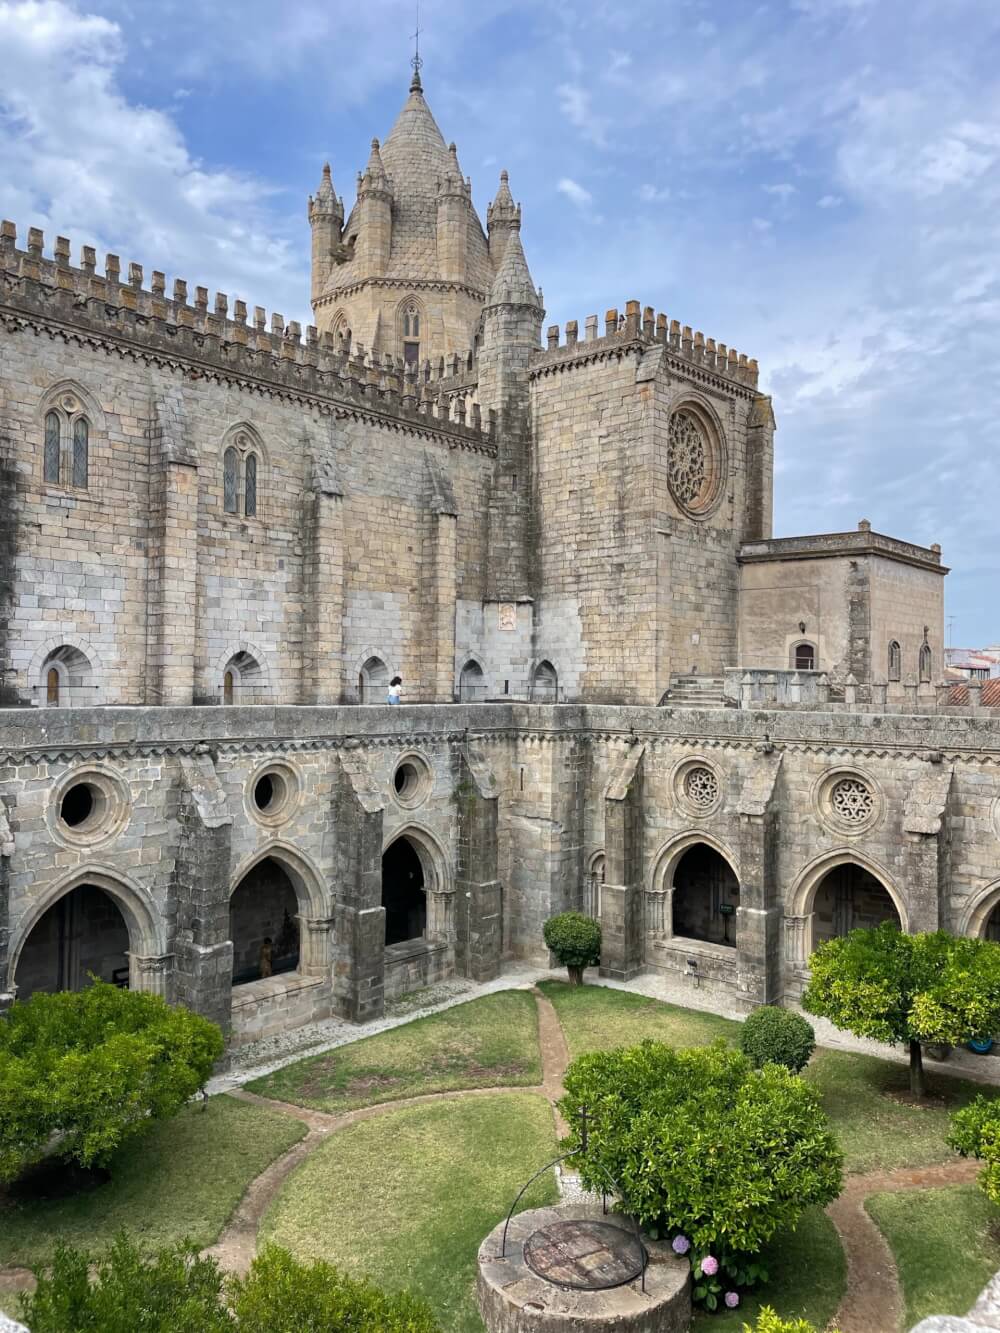 The Evora cathedral and courtyard